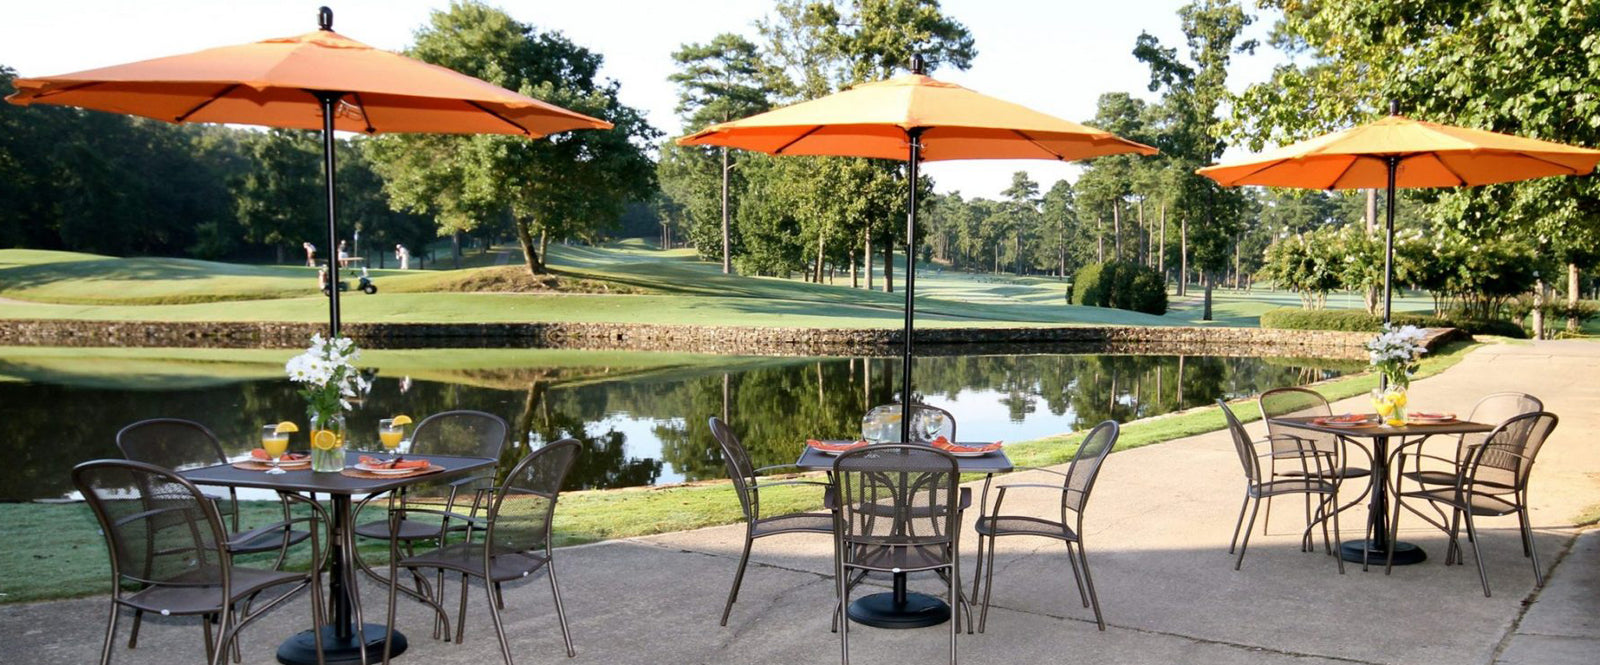 Patio Accessories such as Umbrellas, Firepits, Room Dividers and more to compliment any style.